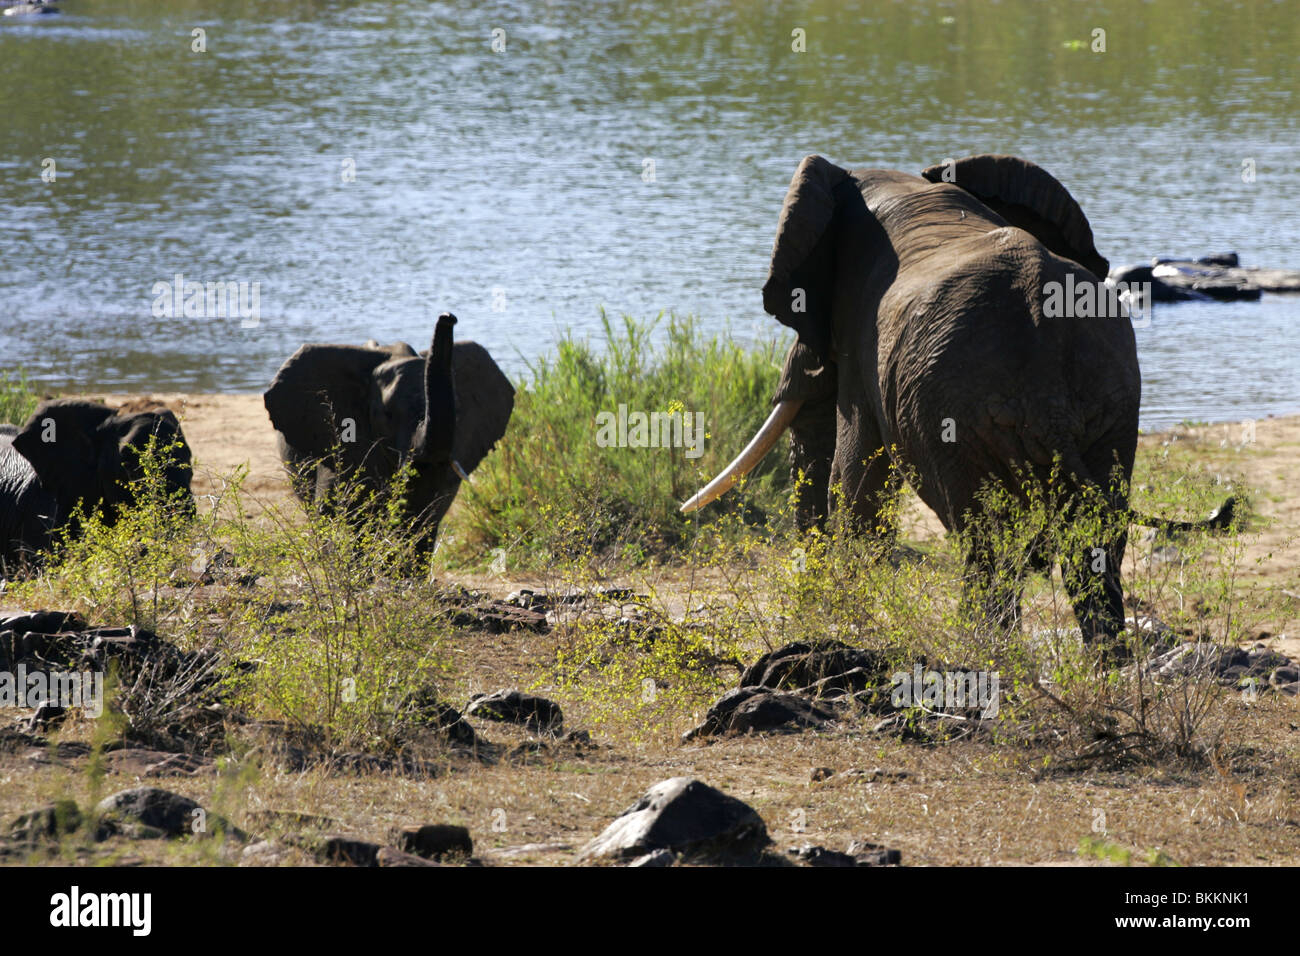 African Elephant, Kruger Park, South Africa Stock Photo